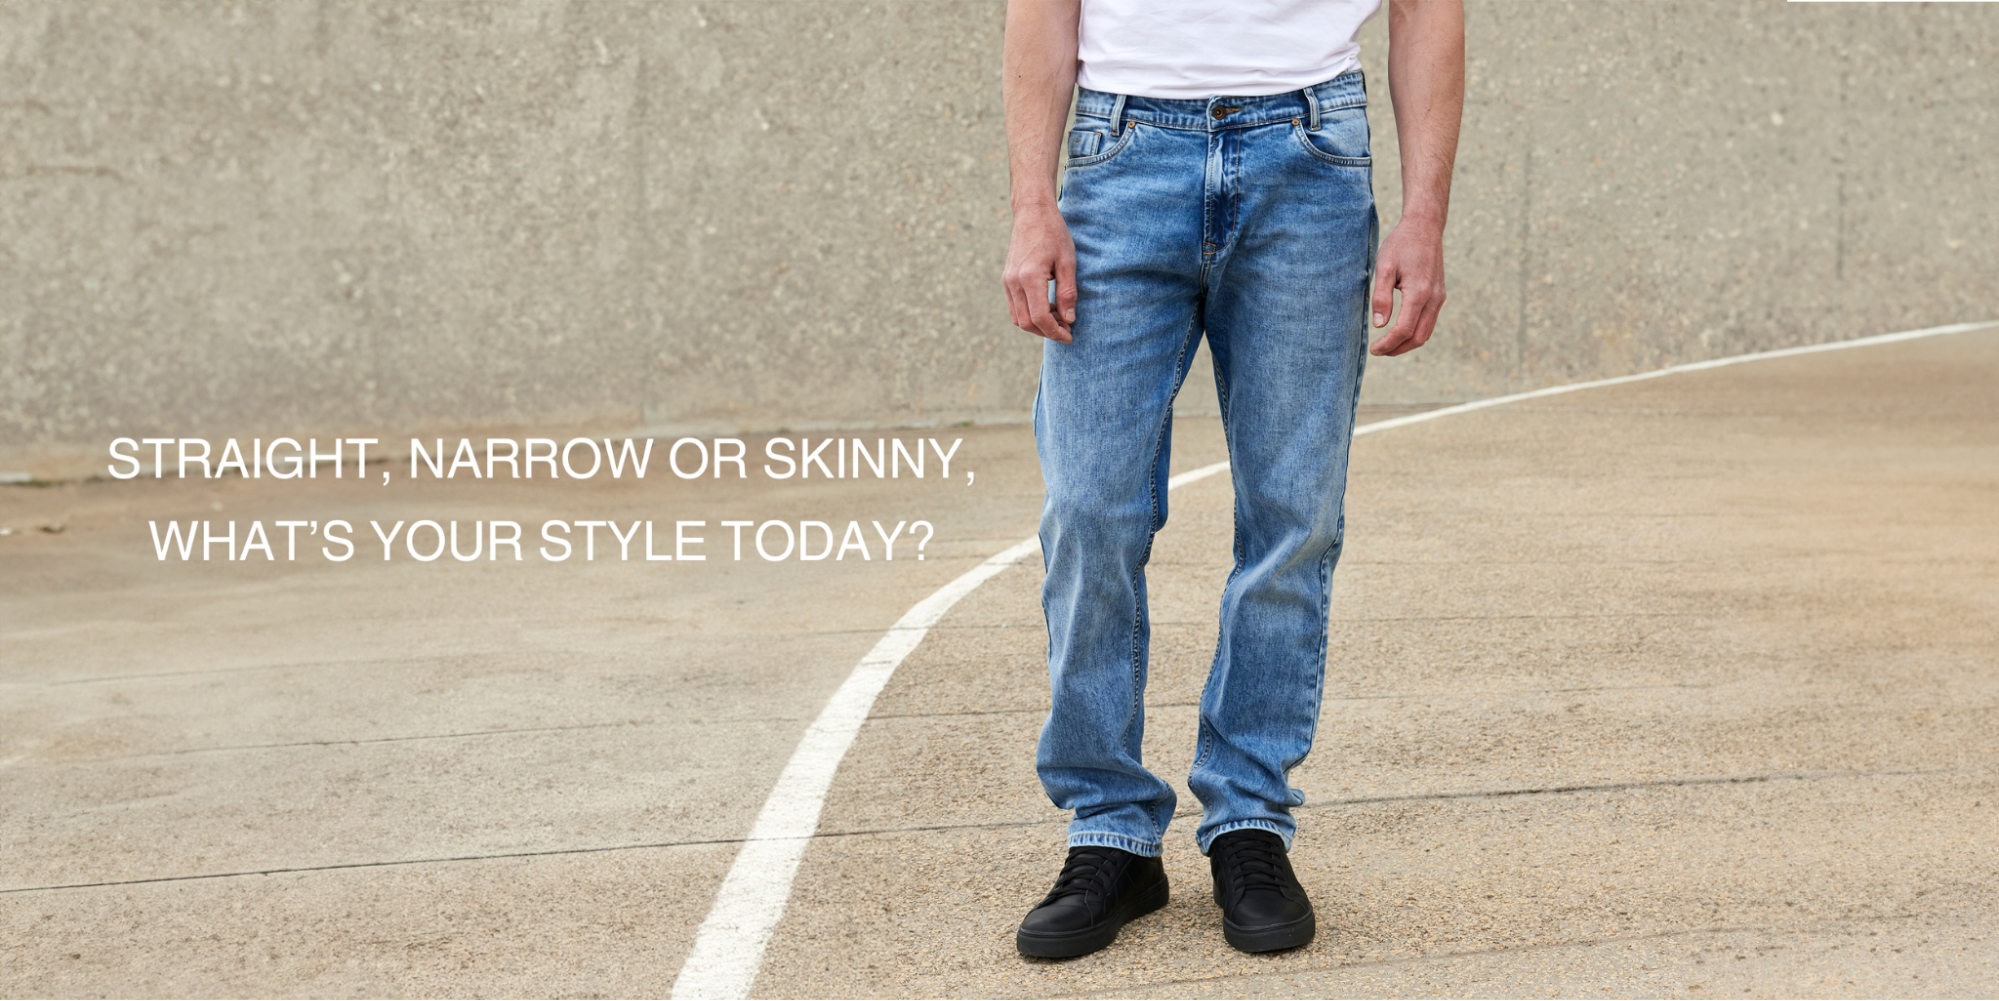 Straight, Narrow or Skinny, what’s your style today?